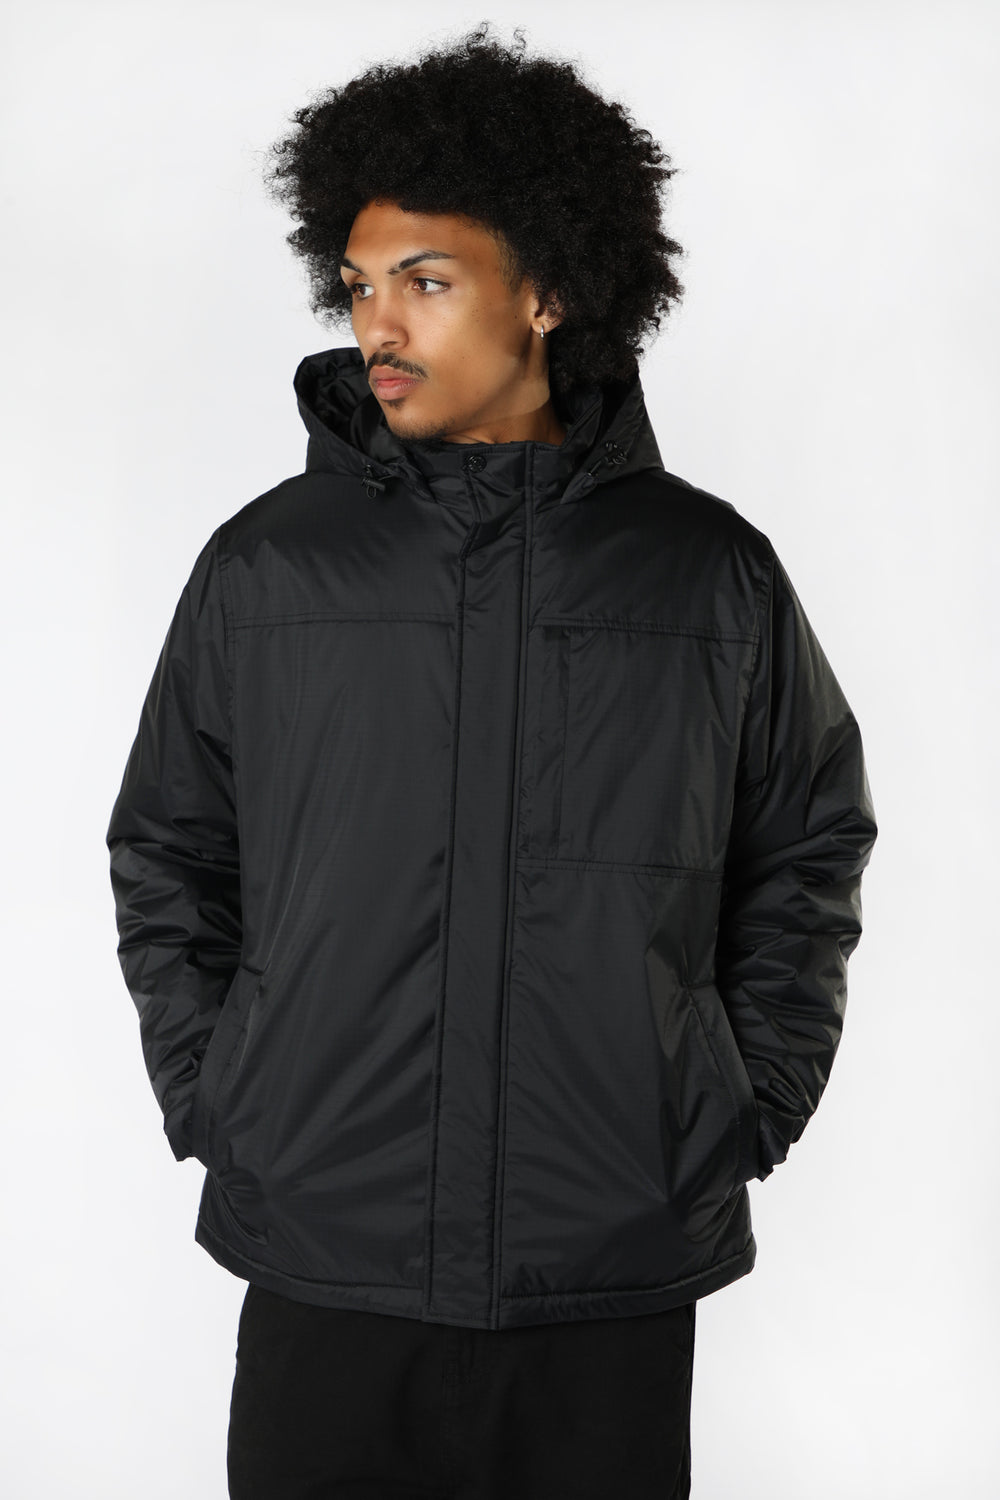 Ammesia Mens Poly-filled Jacket Ammesia Mens Poly-filled Jacket